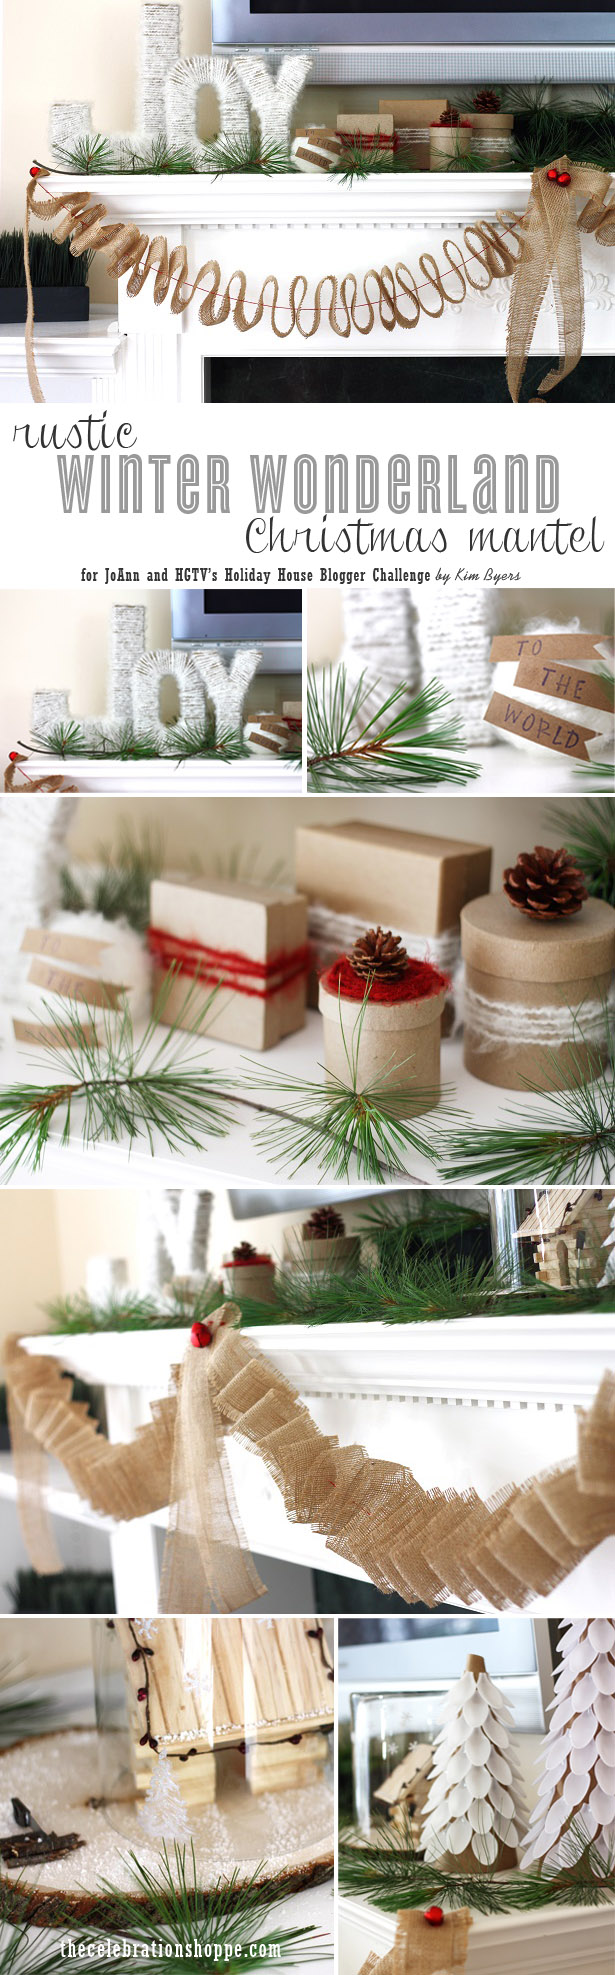 Rustic Winter Wonderland Christmas Mantel for HGTV Holiday Home | Created by Kim Byers of TheCelebrationShoppe.com